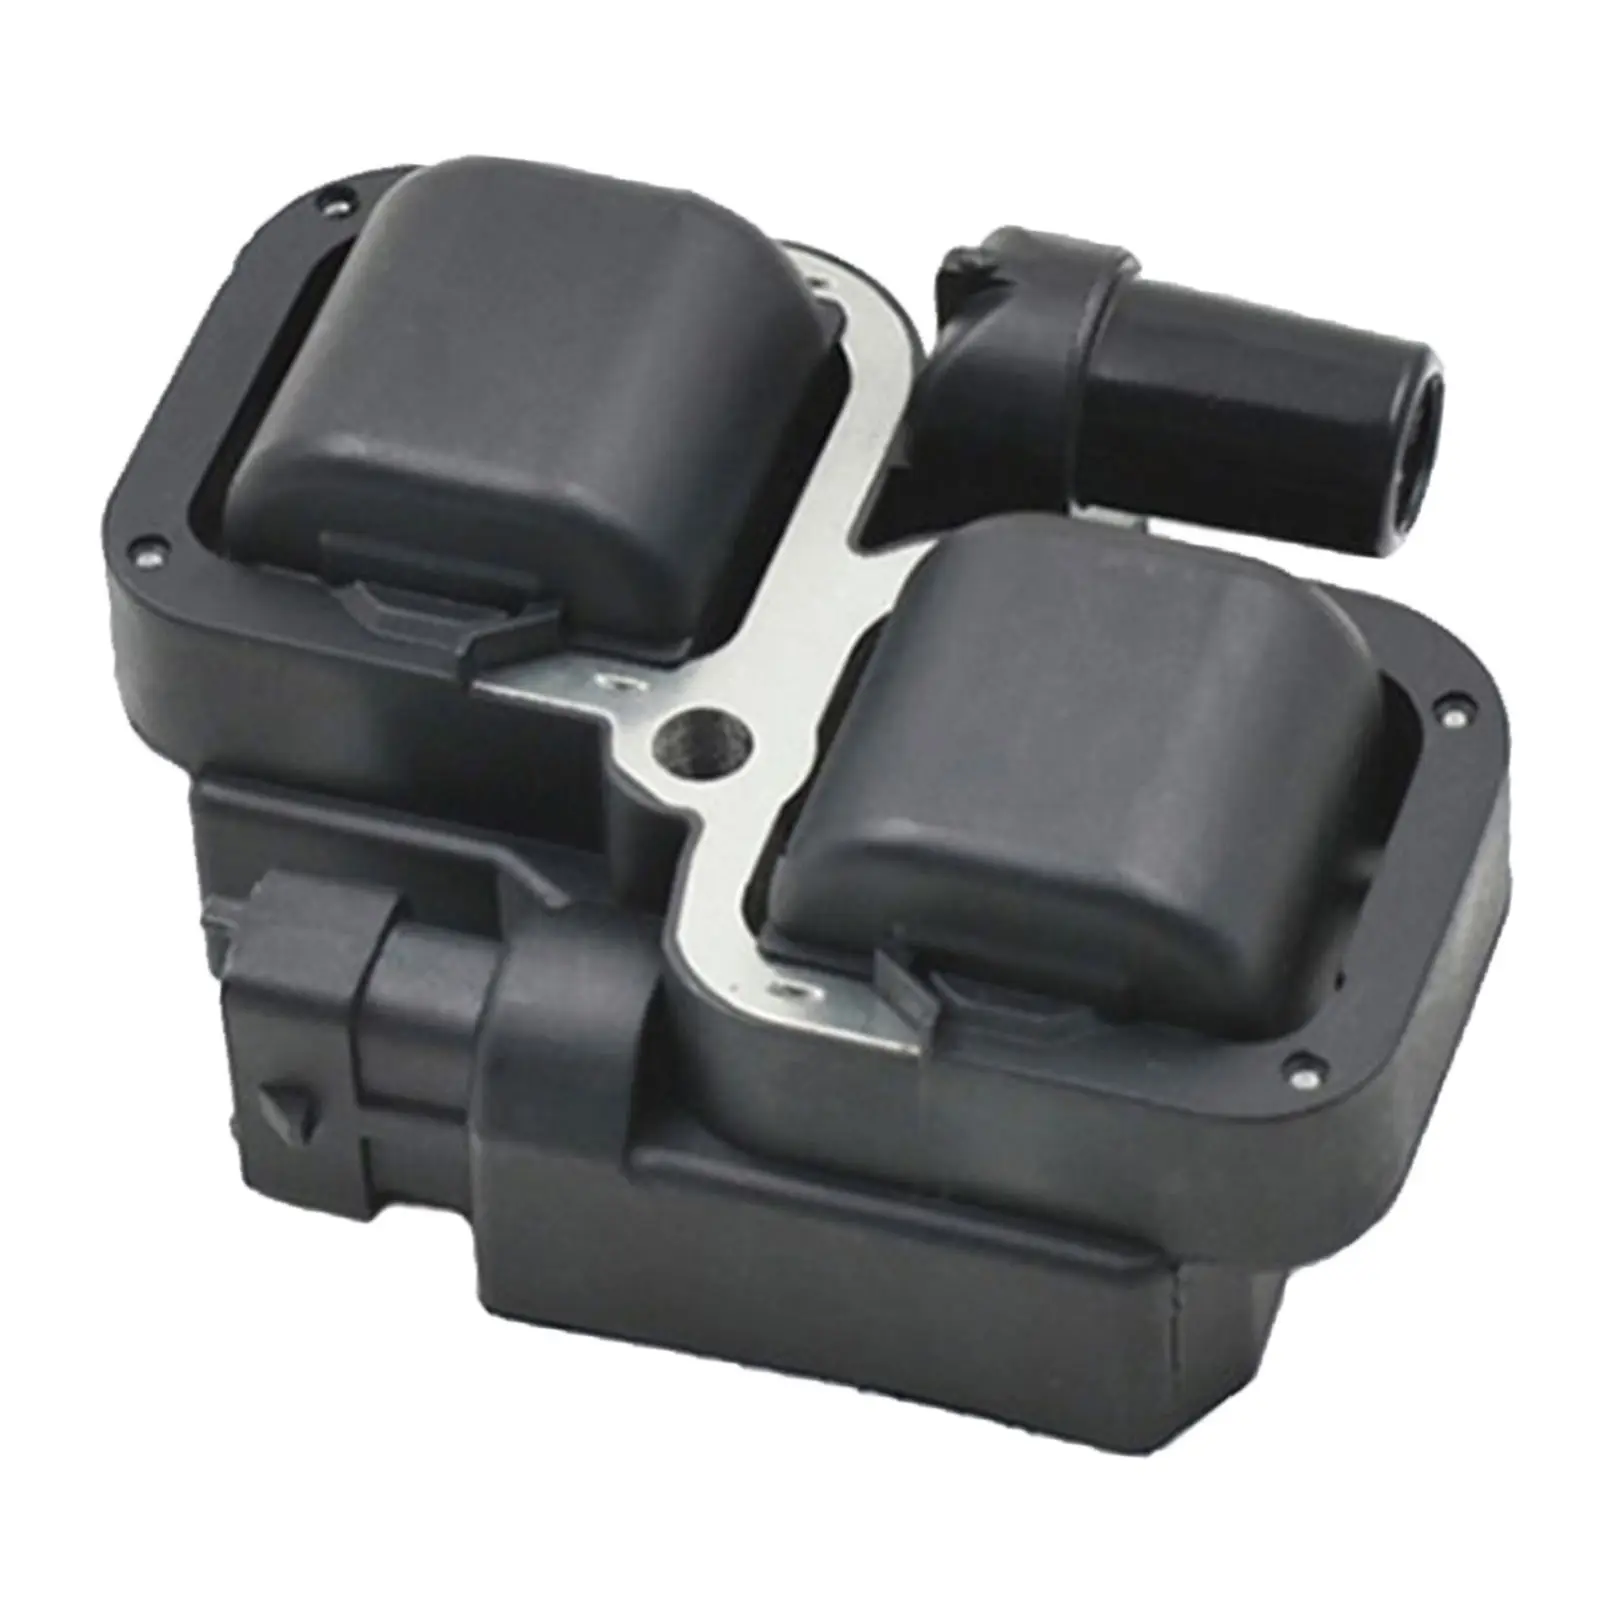 Car Ignition Coil Pack Replacement Fits for Mercedes- C CL CLK ML S SLK 0221503012 0221503035